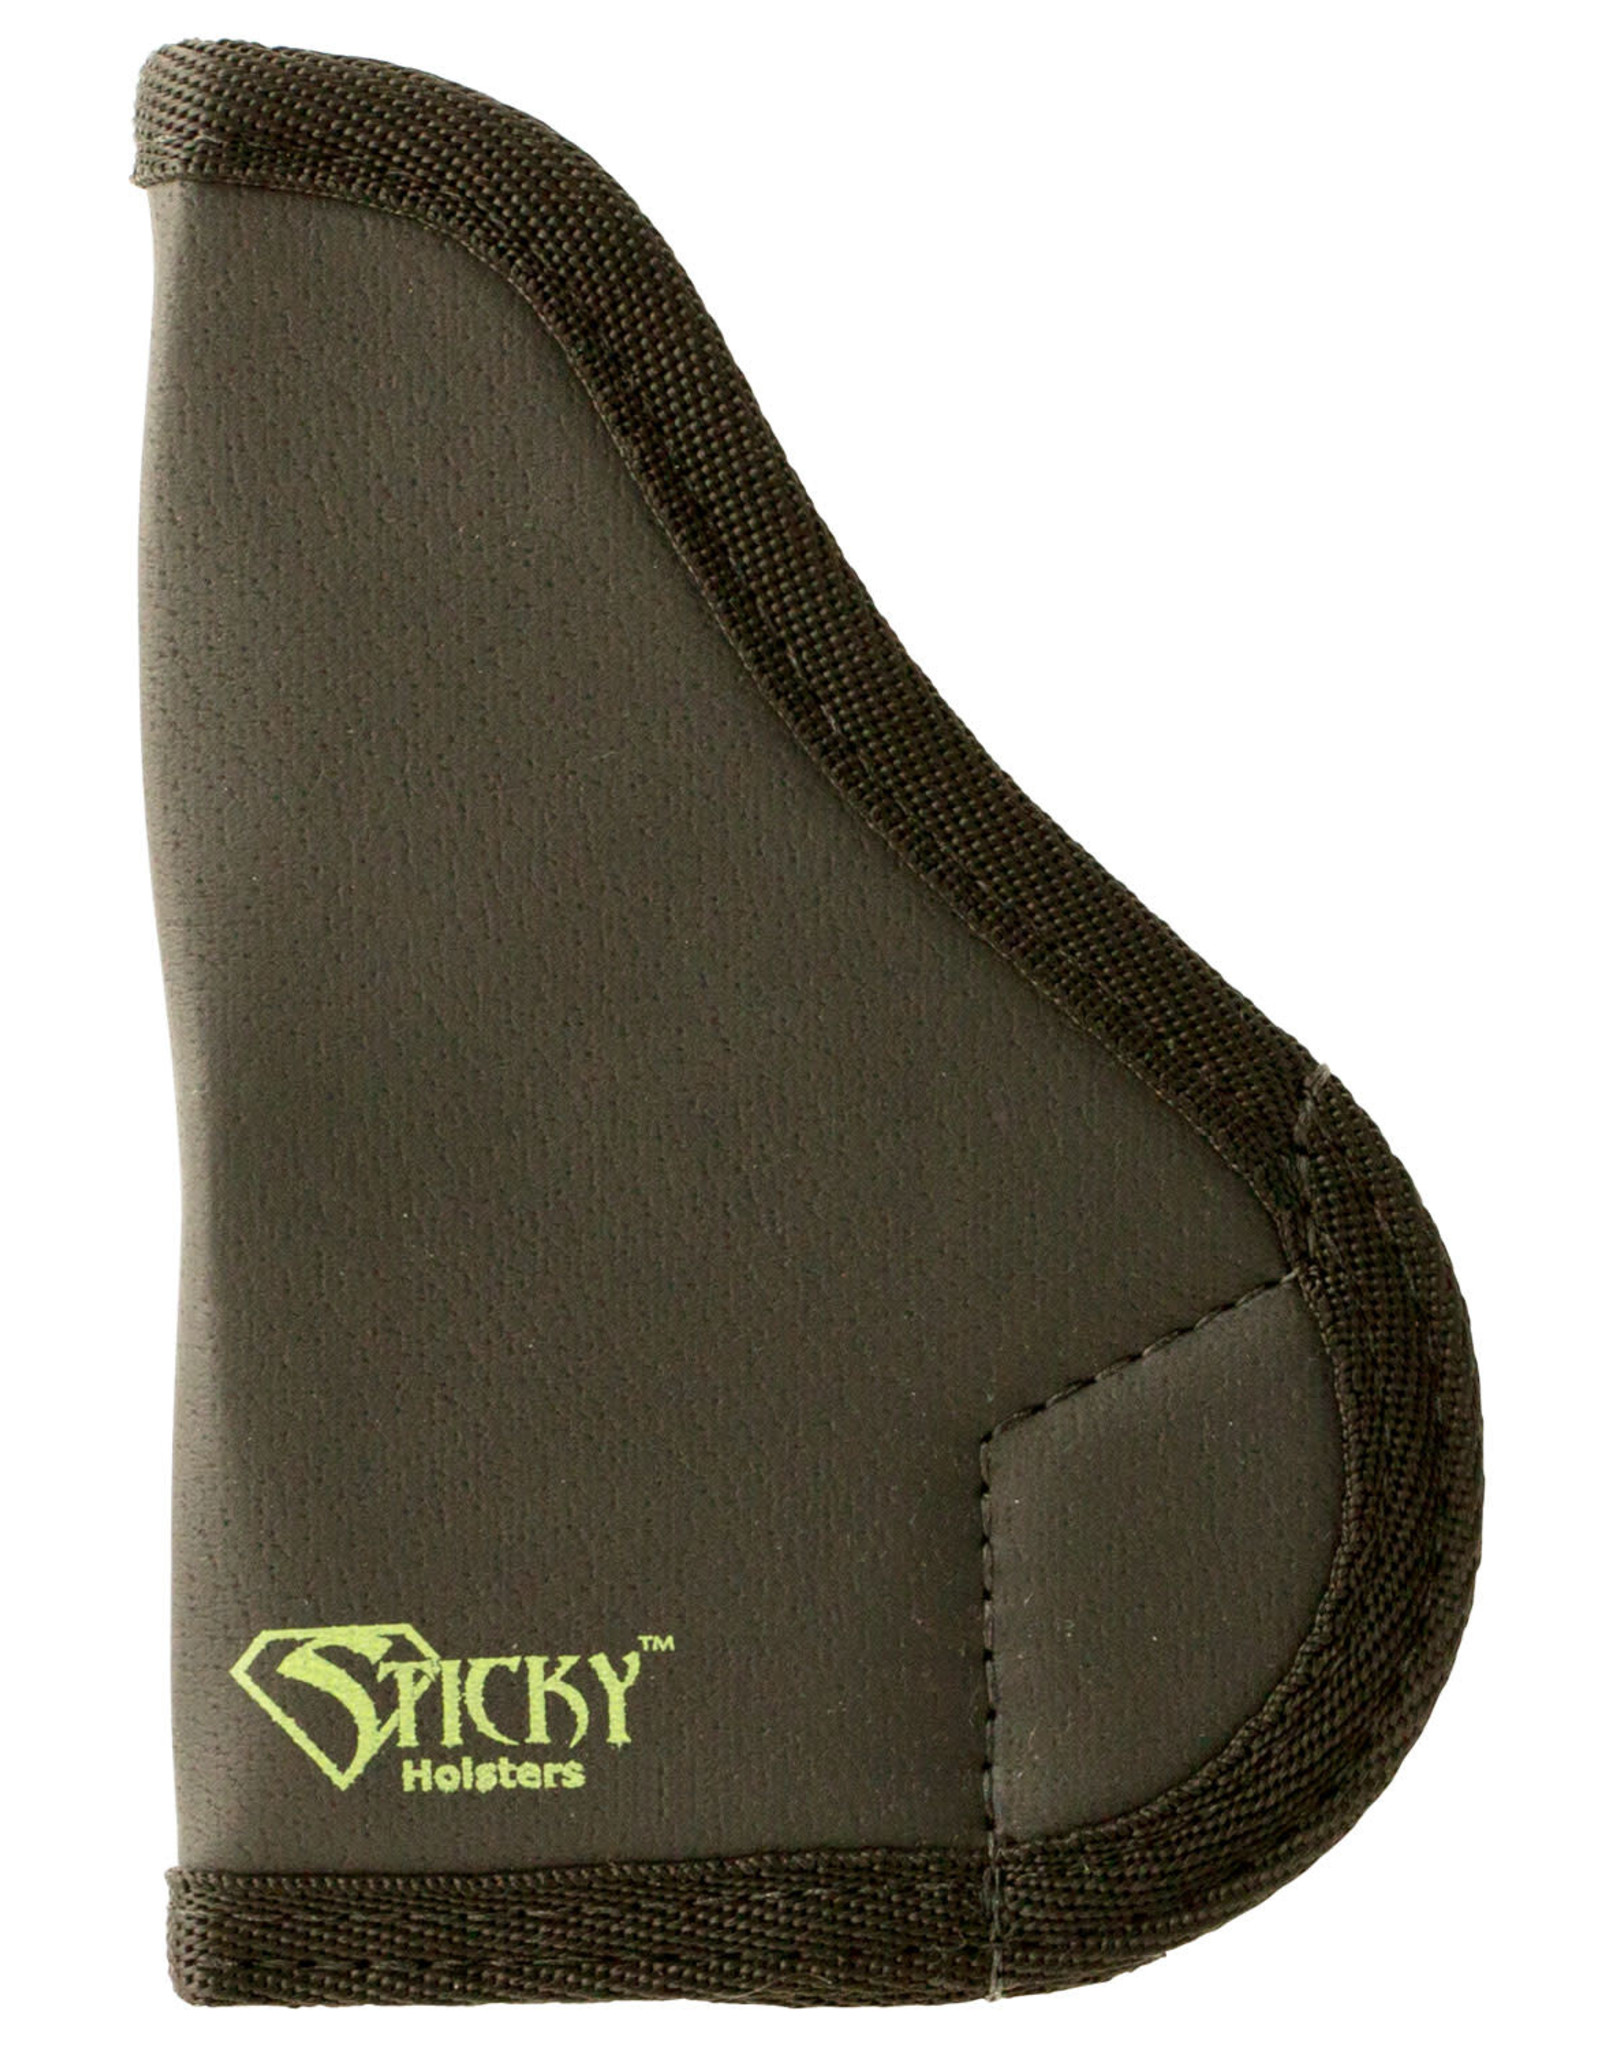 STICKY HOLSTERS Sticky Holster MD-1 Fits Small 9mm up to 3.5"